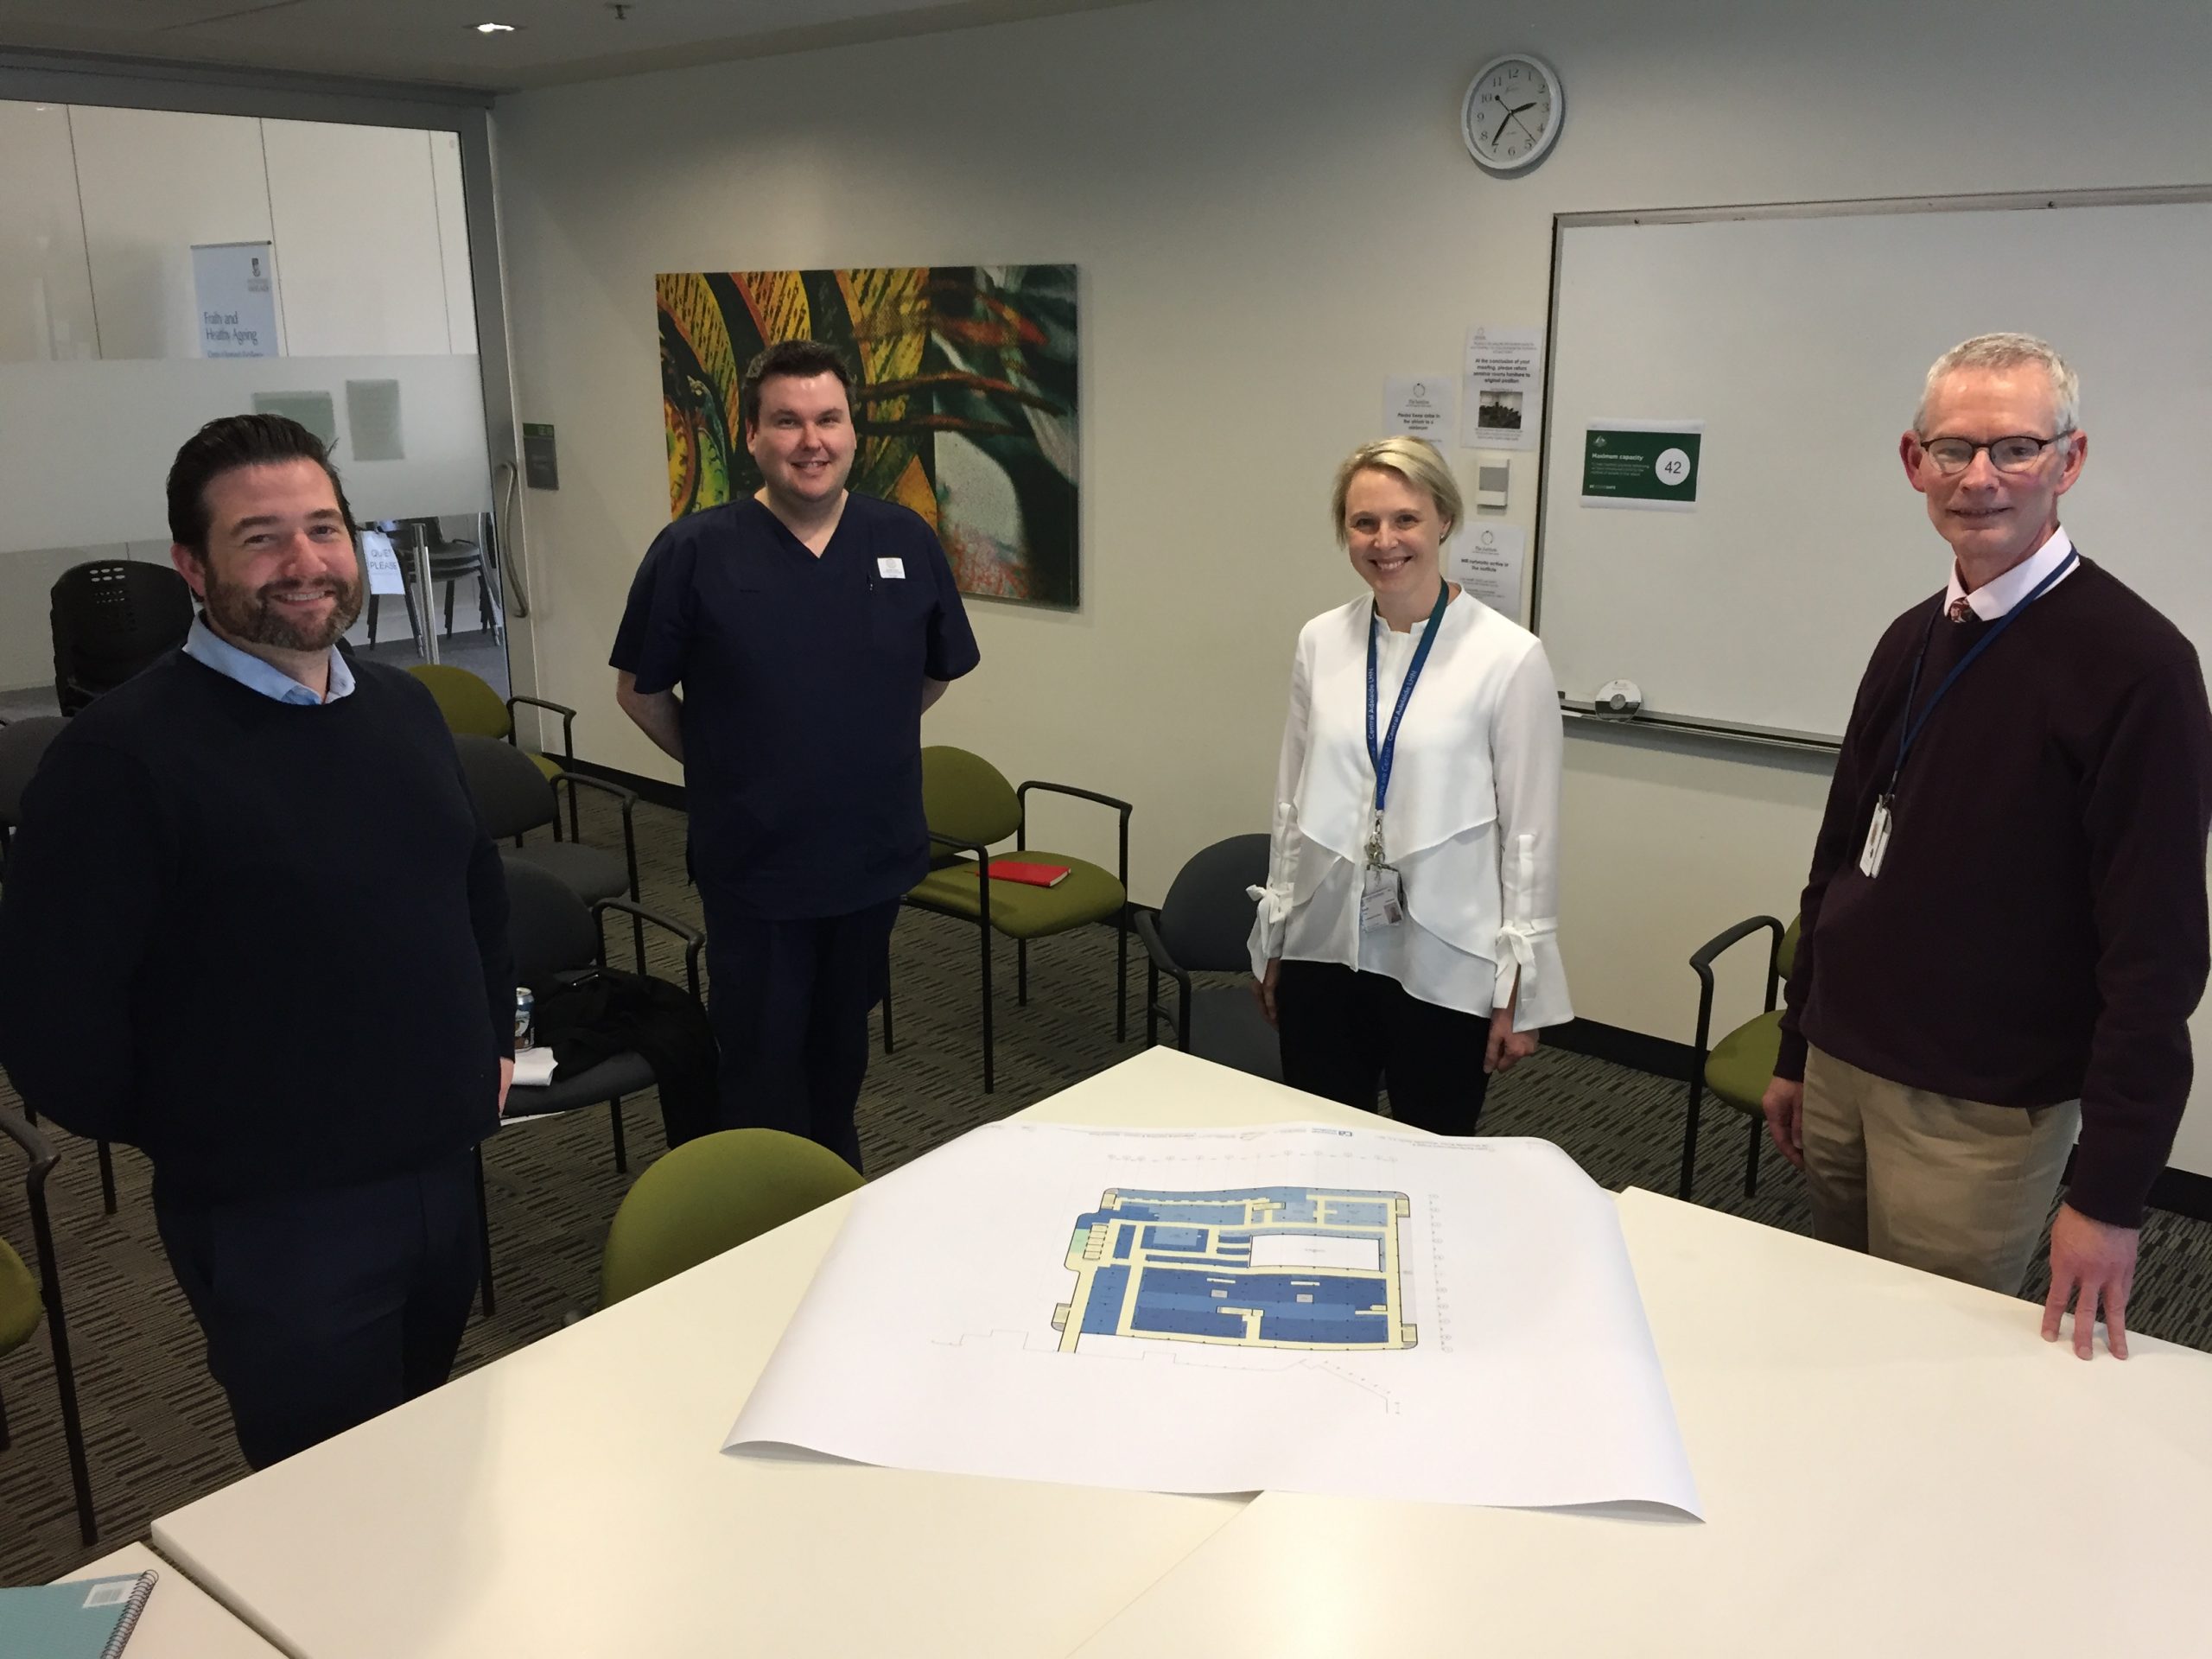 Staff and community help planning for TQEH redevelopment